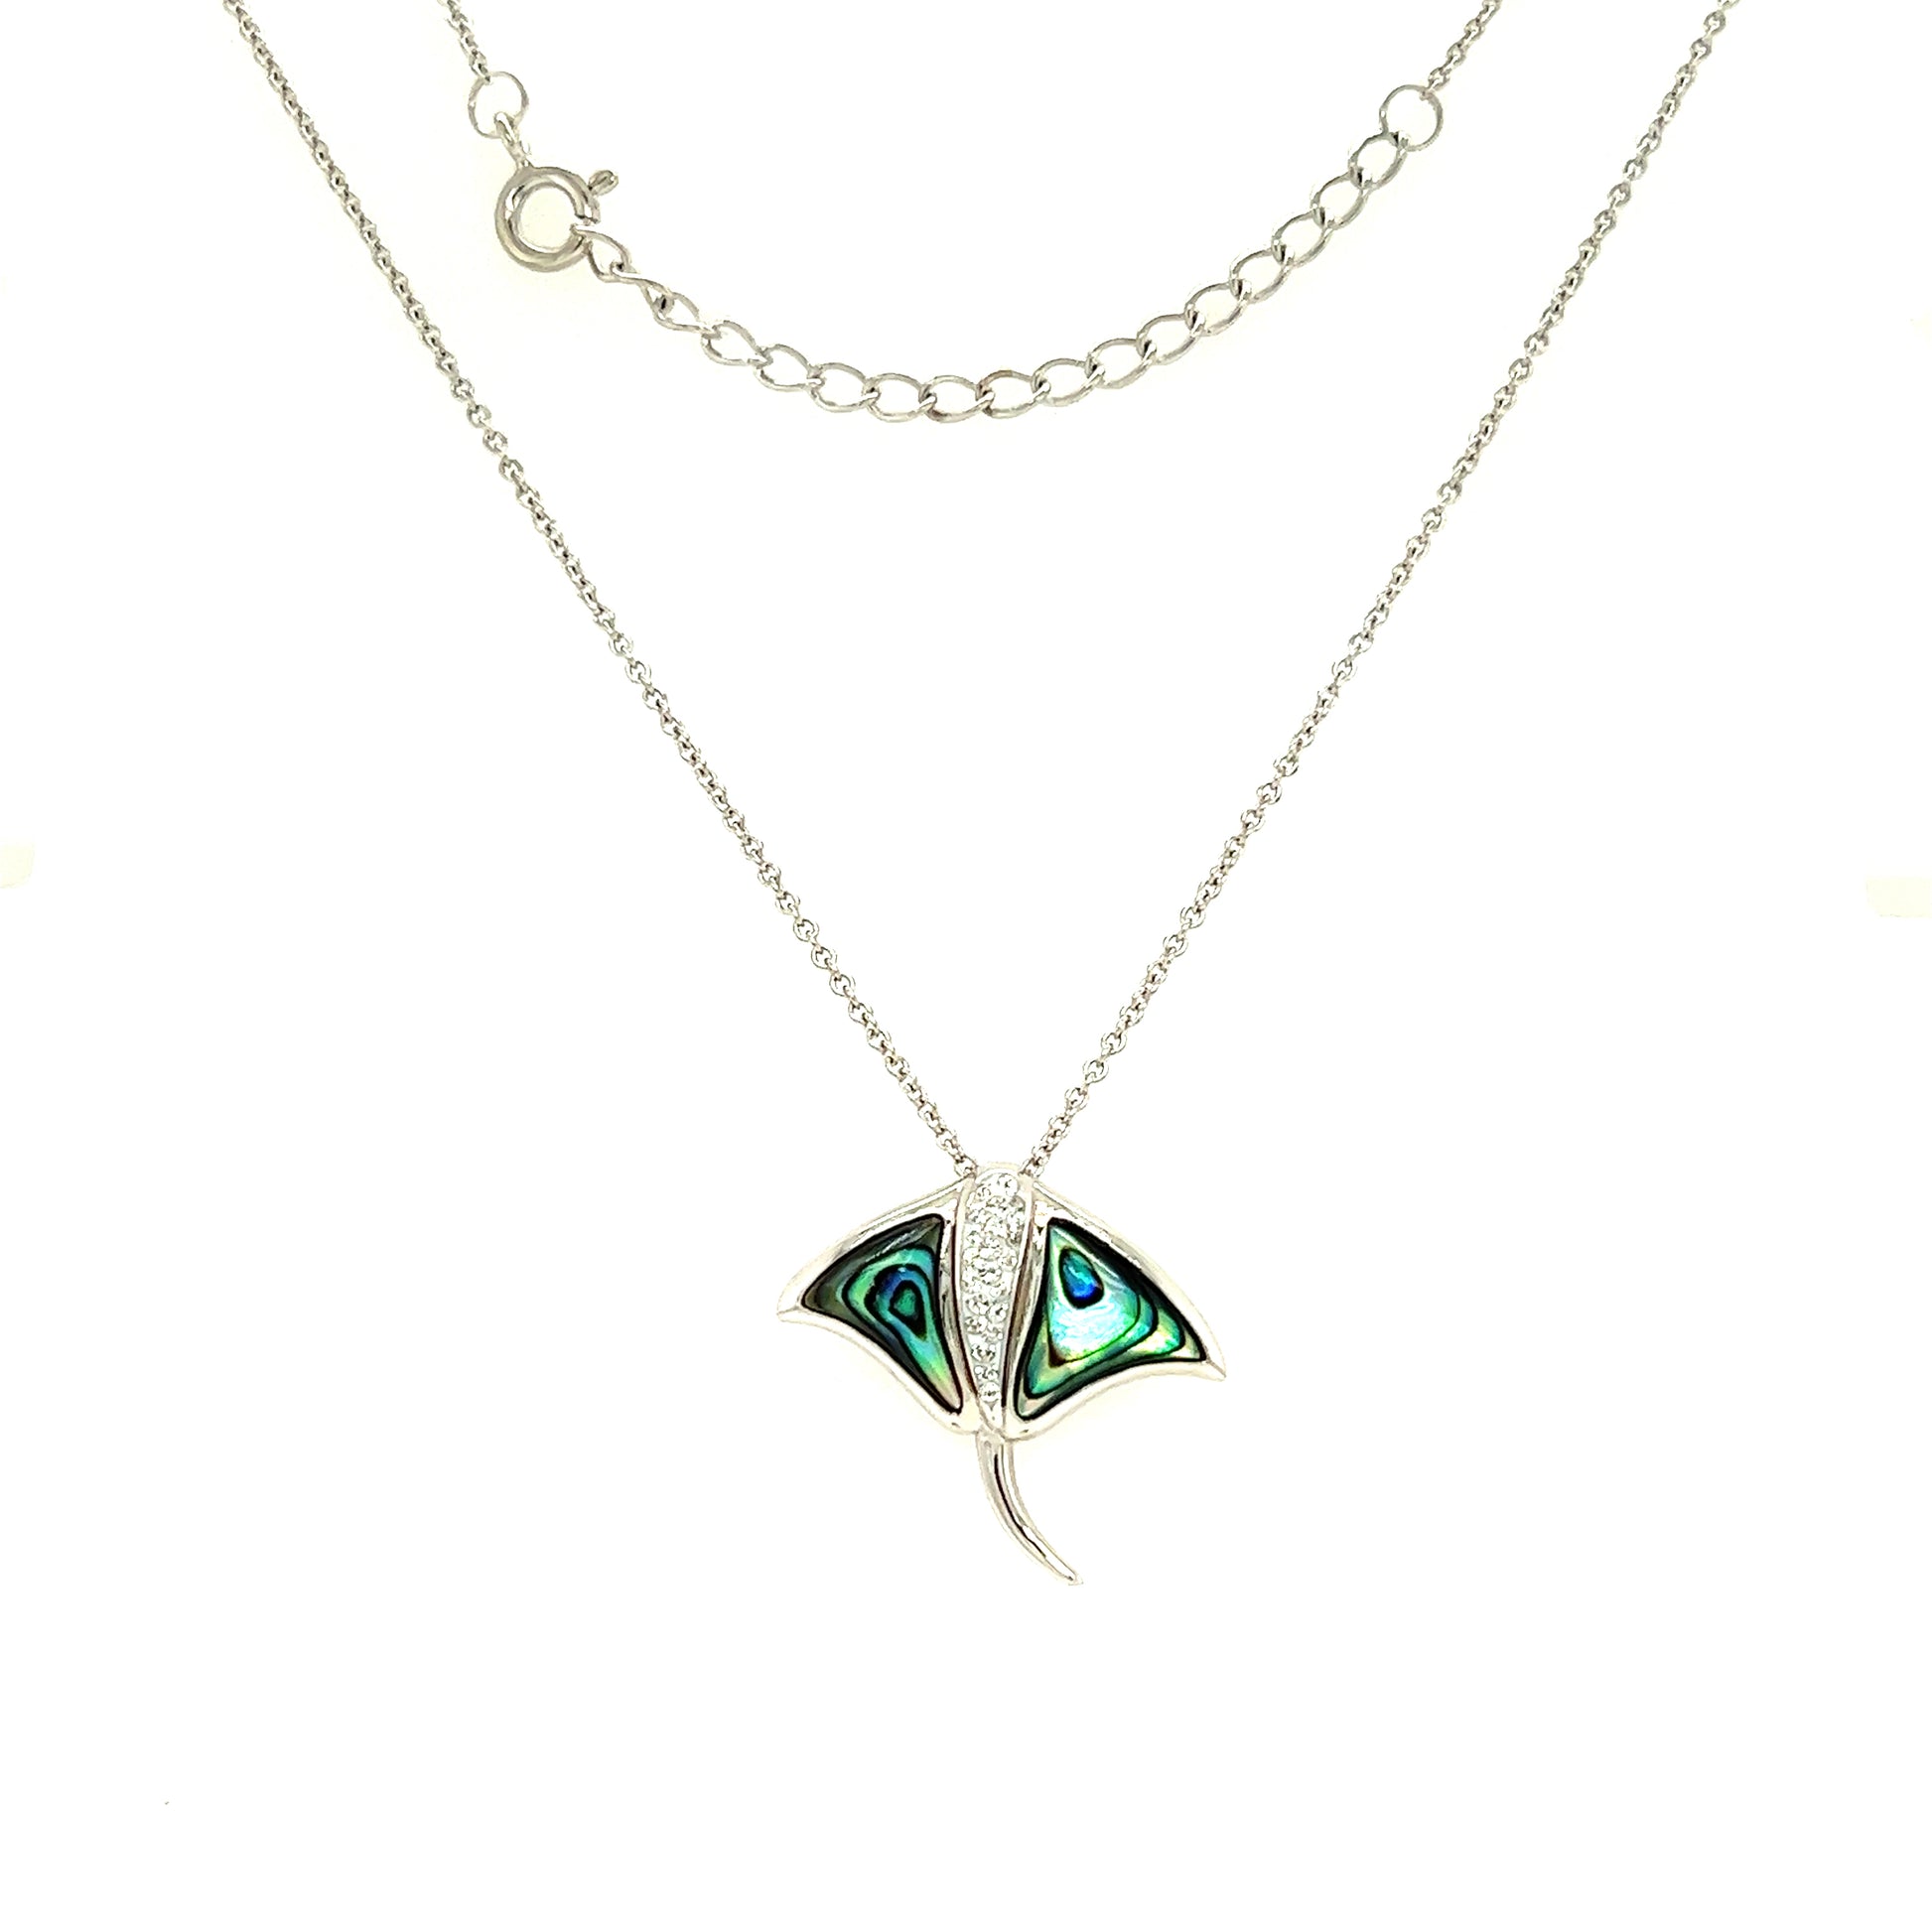 Manta Ray Necklace with Abalone Shell and White Crystals in Sterling Silver Full Necklace Front View